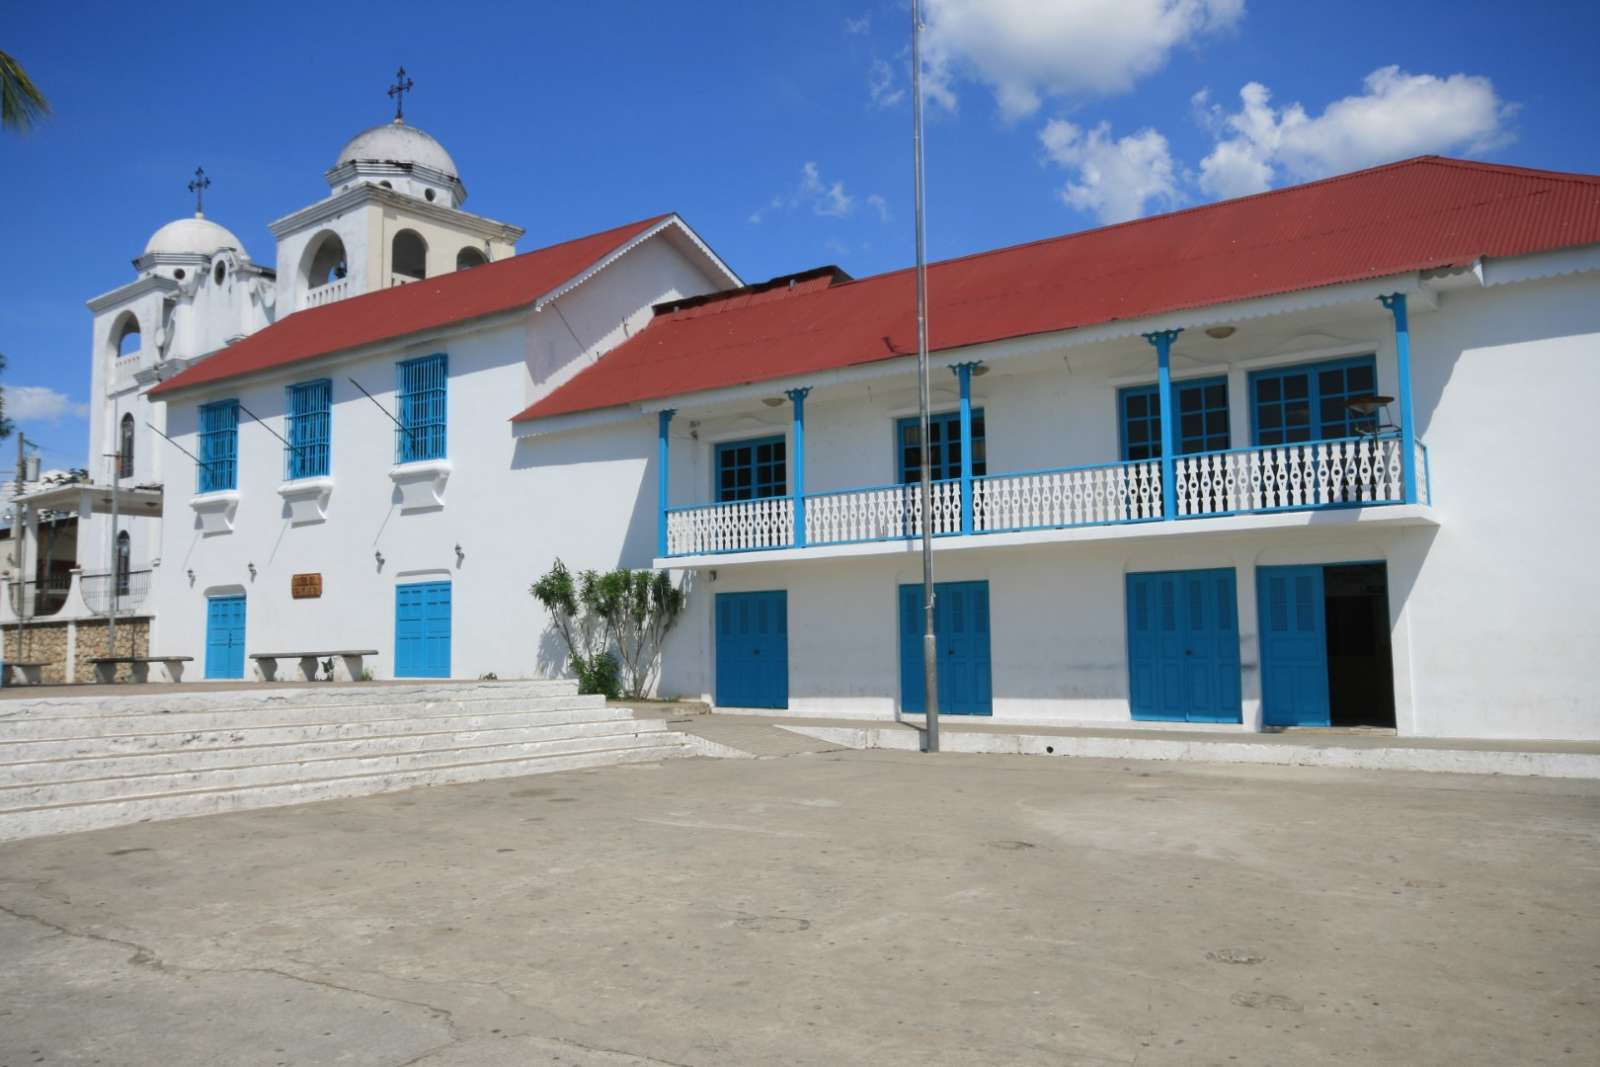 Town hall in Flores, Guatemala